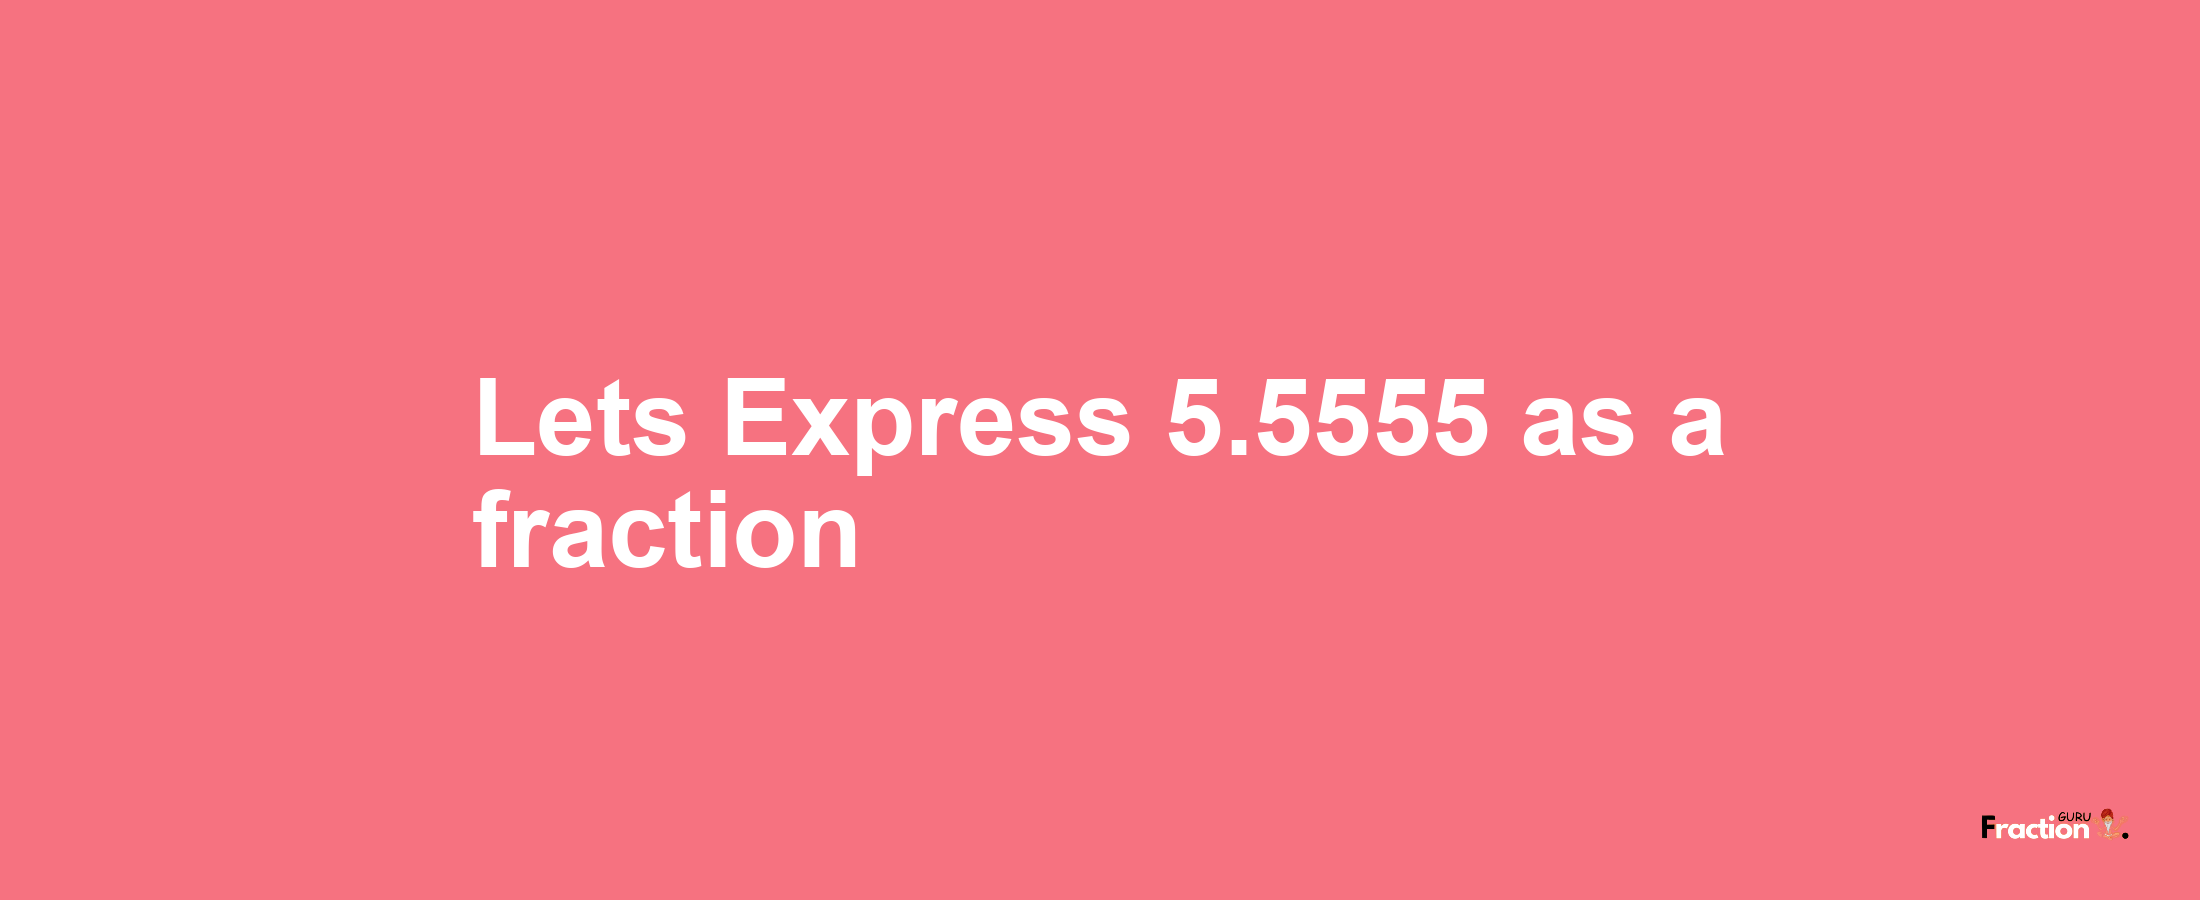 Lets Express 5.5555 as afraction